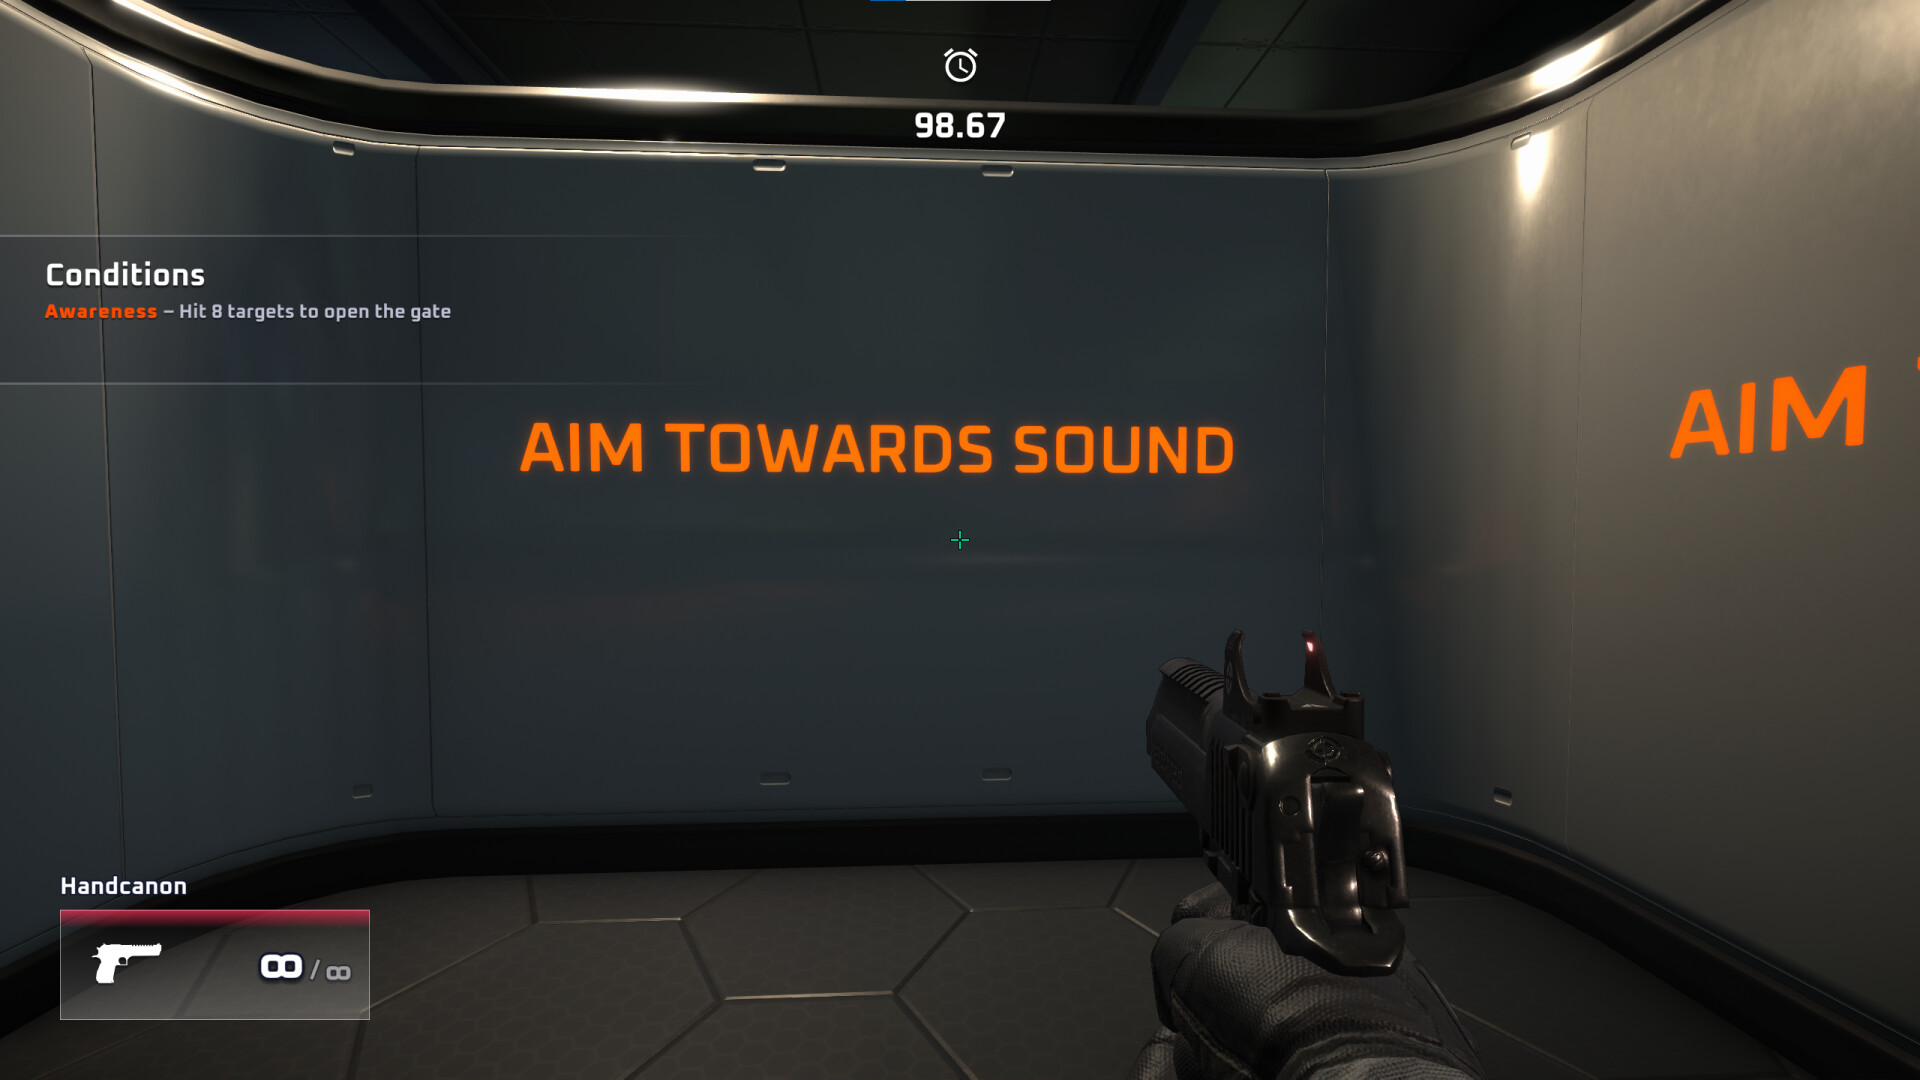 3D Aim Trainer: Top Aim Training Game To Make FPS Players Better